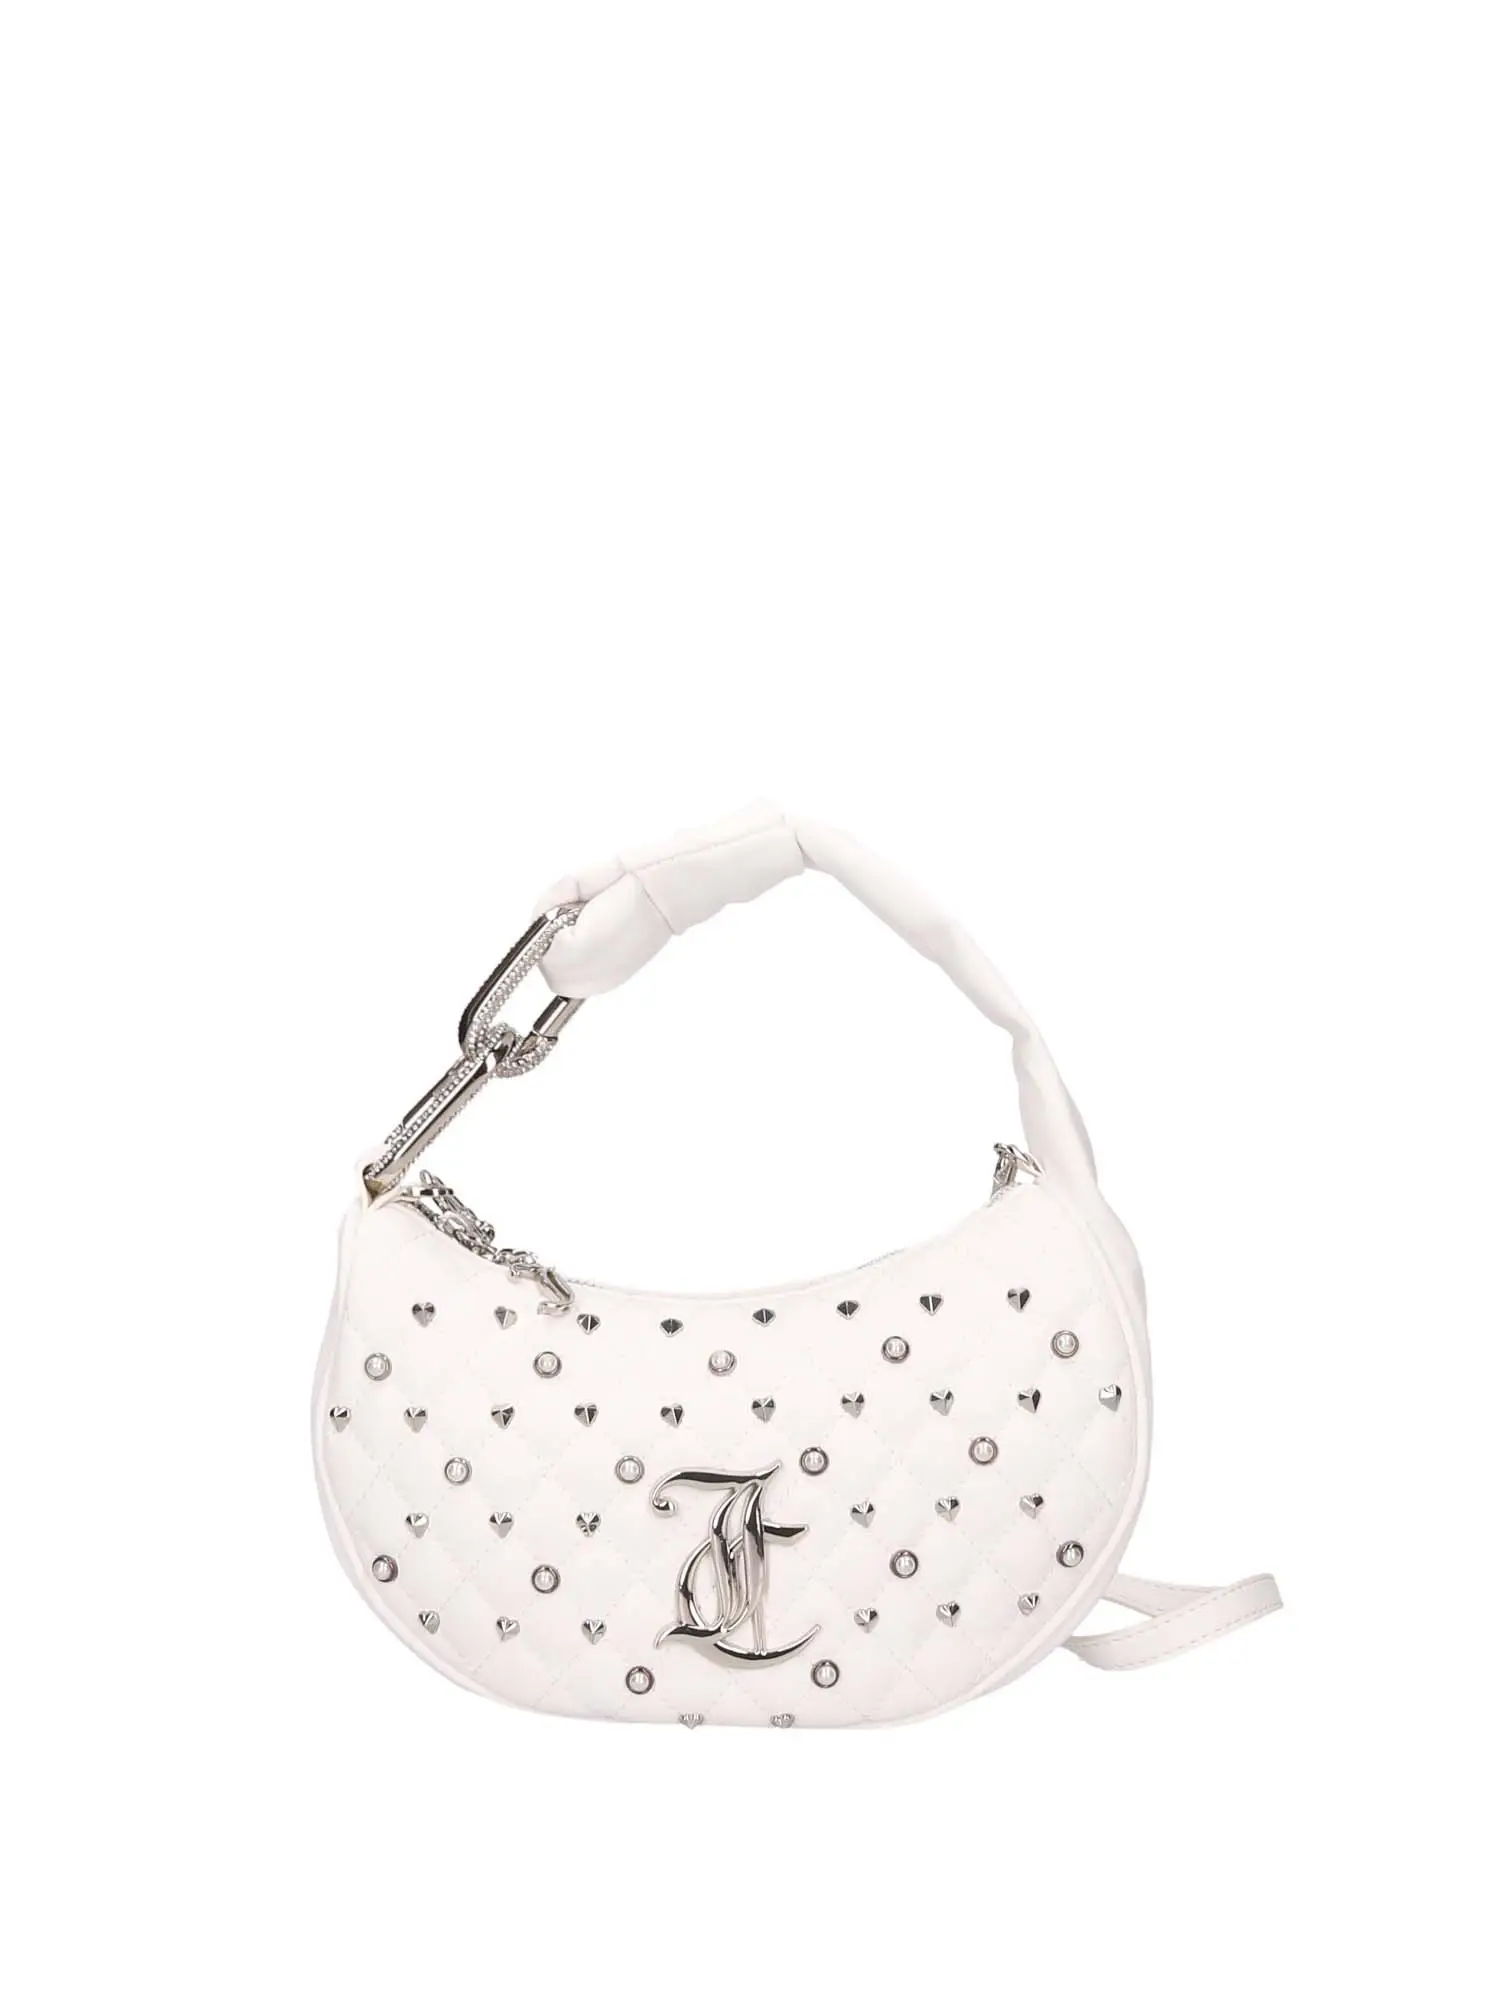 HOBO DONNA - JUICY COUTURE - BEJAY5475WVP - BIANCO, UNICA